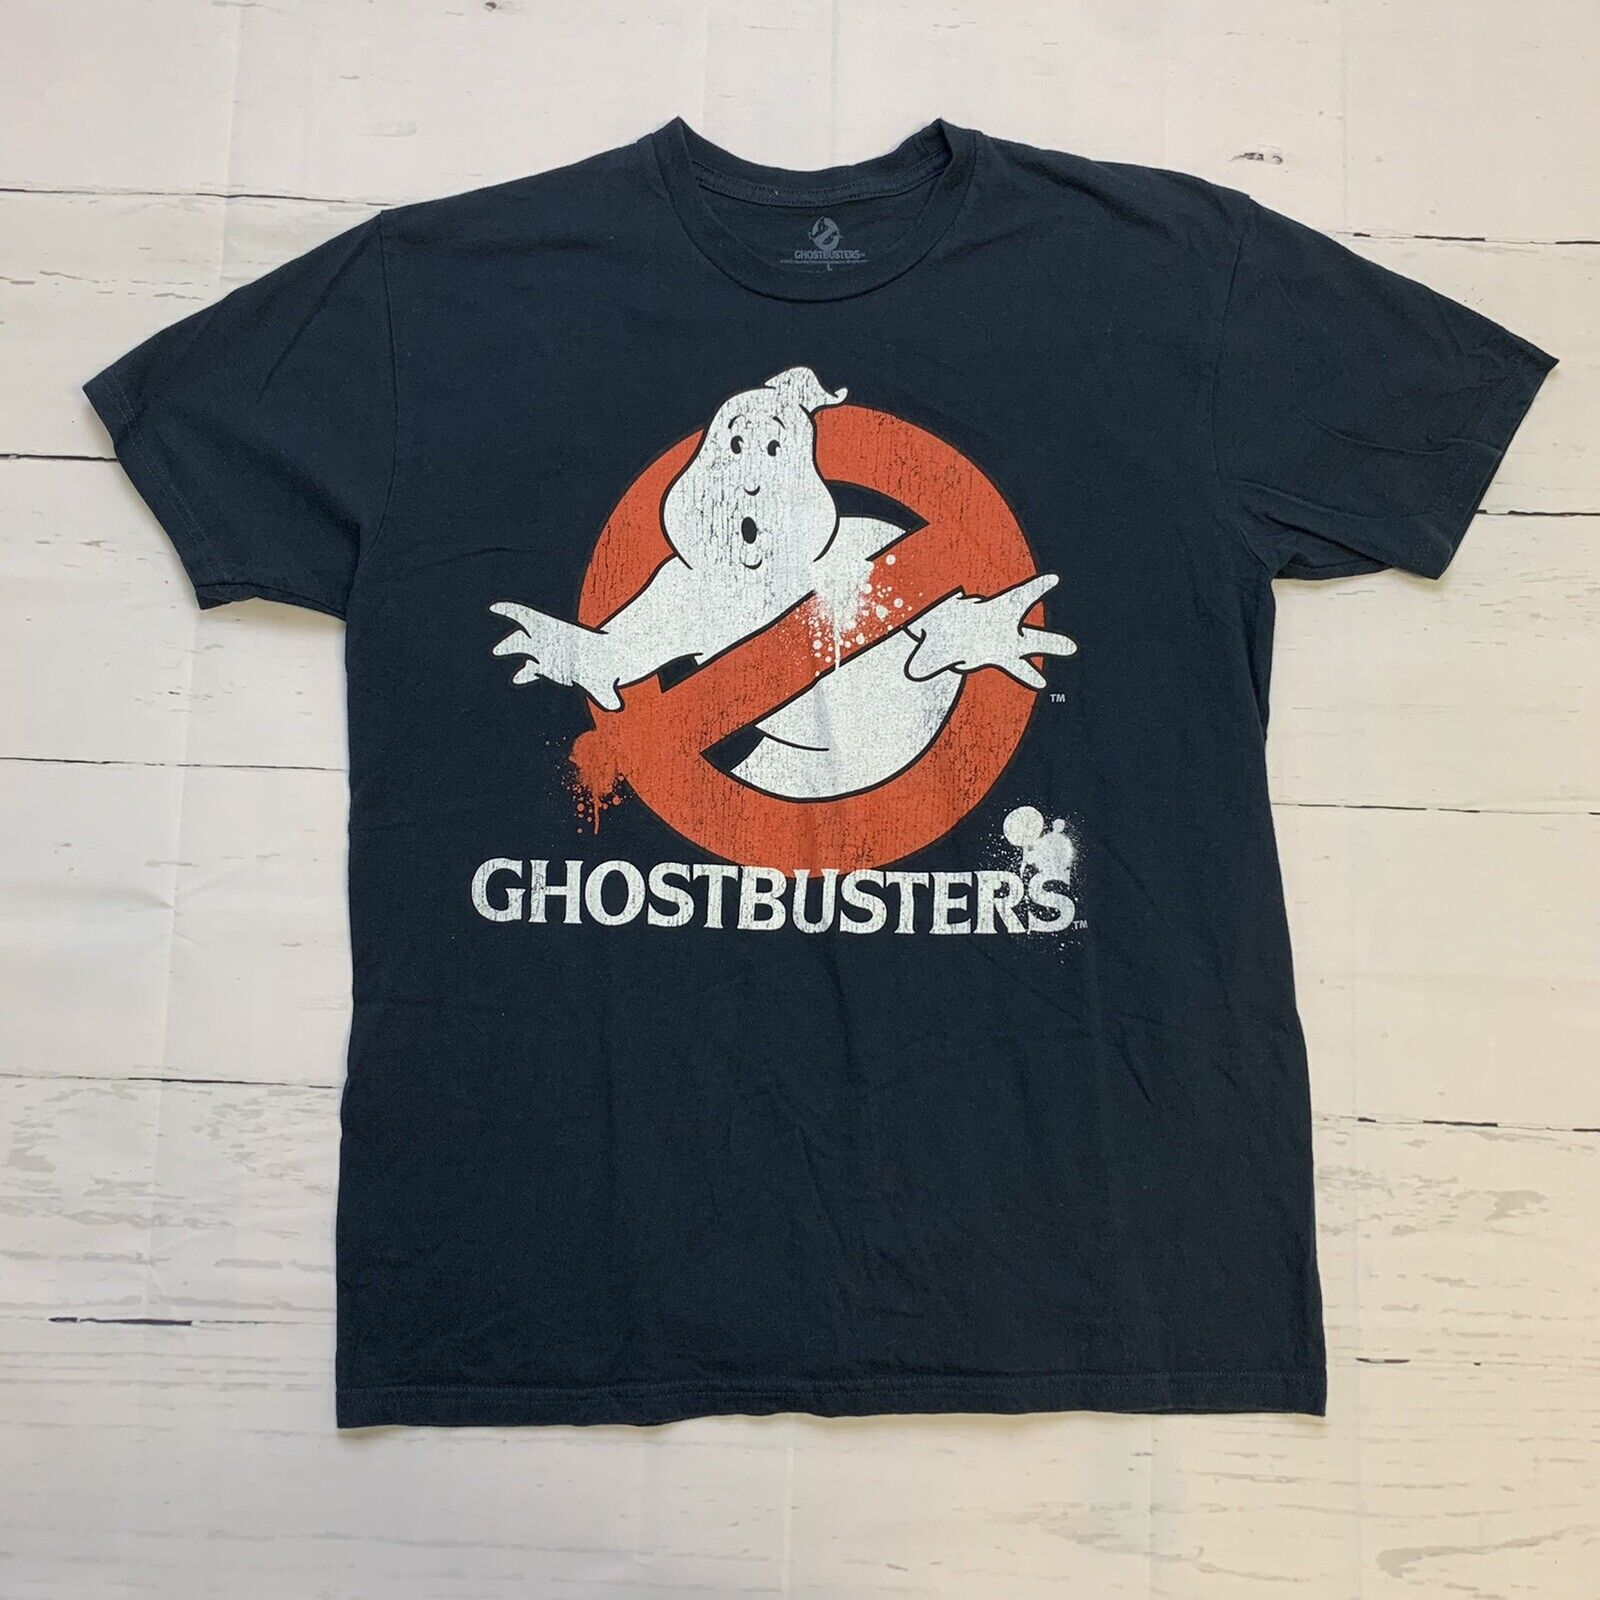 GHOSTBUSTERS - LOGO T-SHIRT - ADULT SIZE L Universal